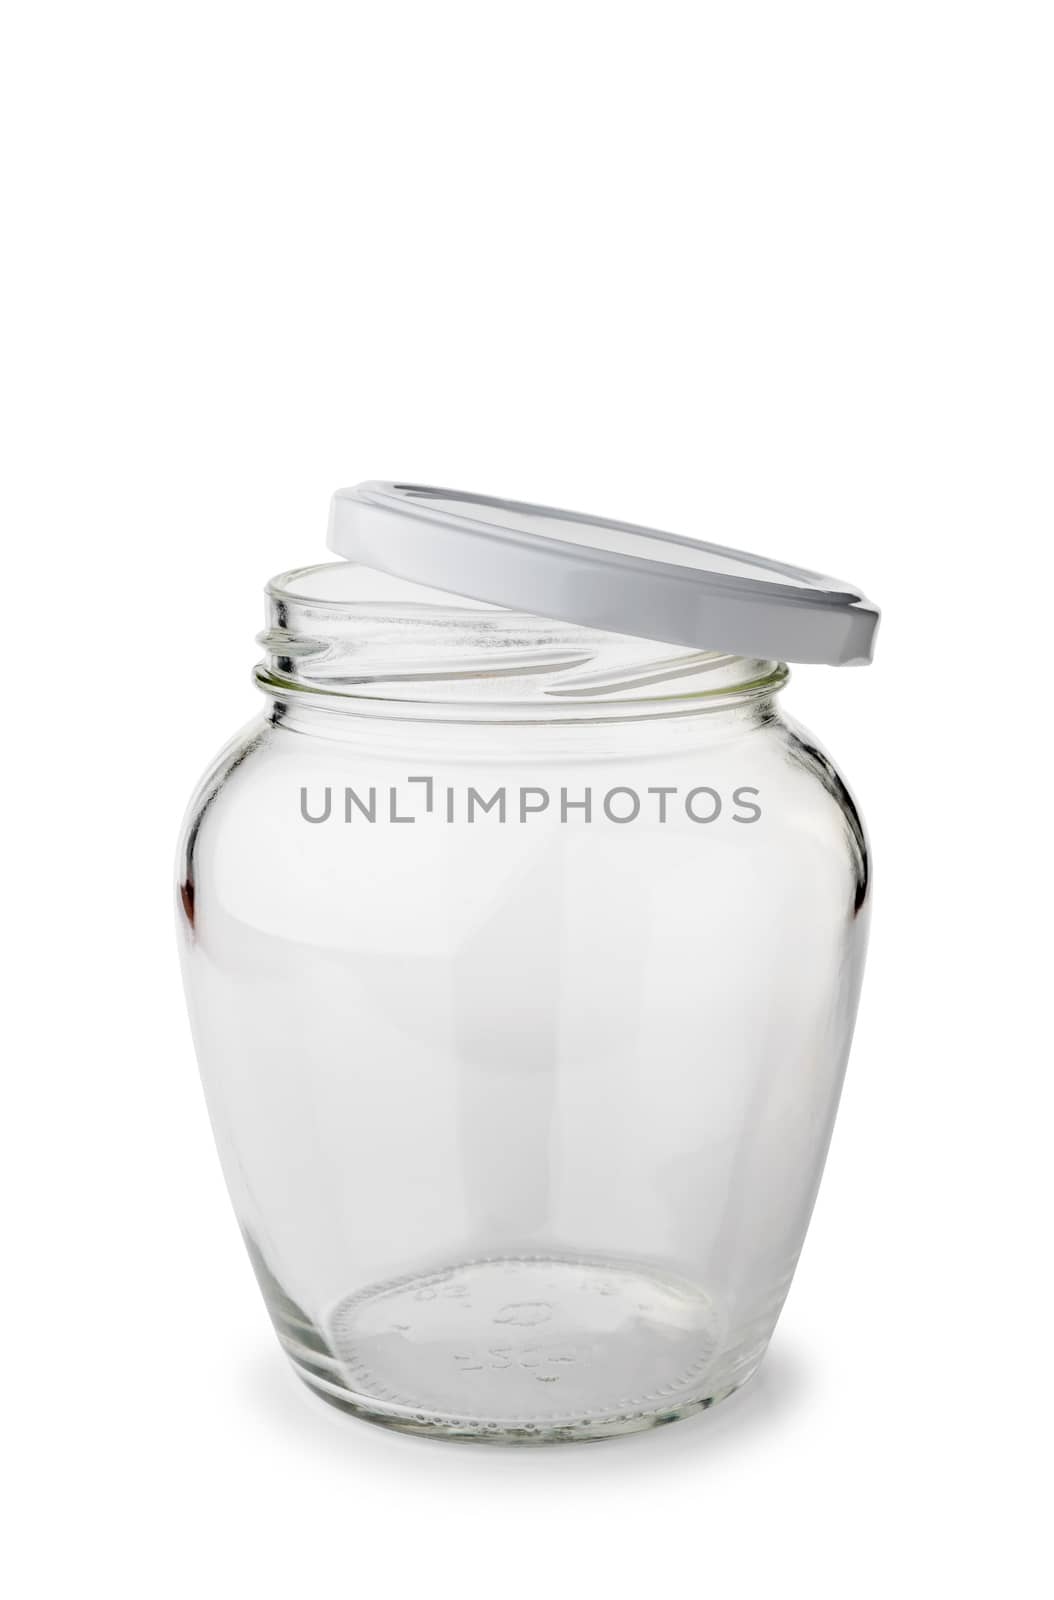 A paunchy open empty glass jar with lid isolated on white background